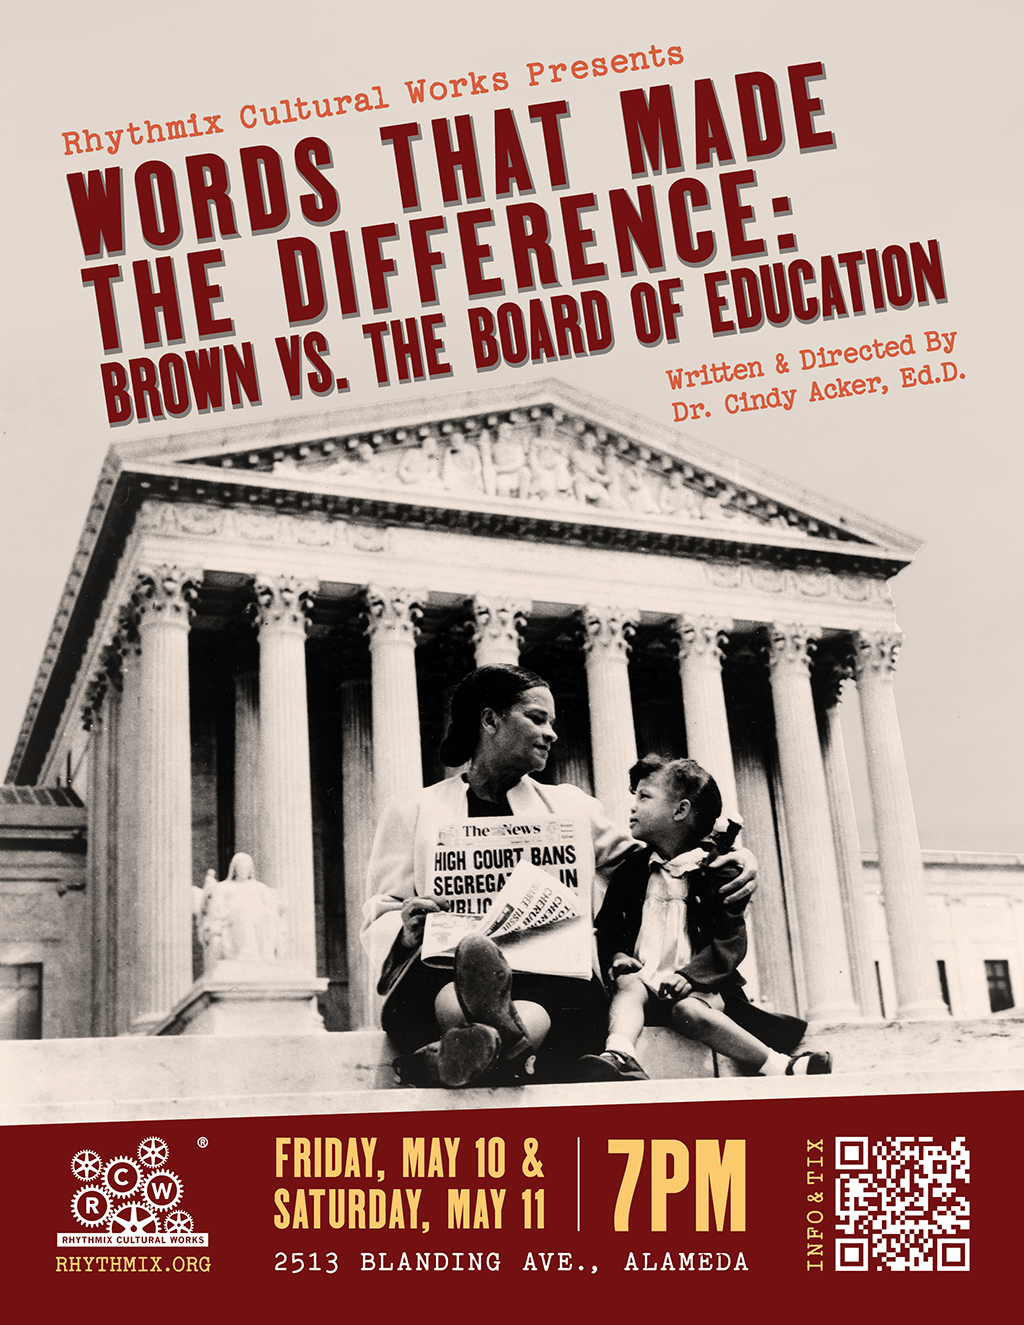 Rhythmix Cultural Works Rhythmix Cultural Works Presents WORDS THAT MADE THE DIFFERENCE  BROWN VS  THE BOARD OF EDUCATION promotion flier on Digifli com